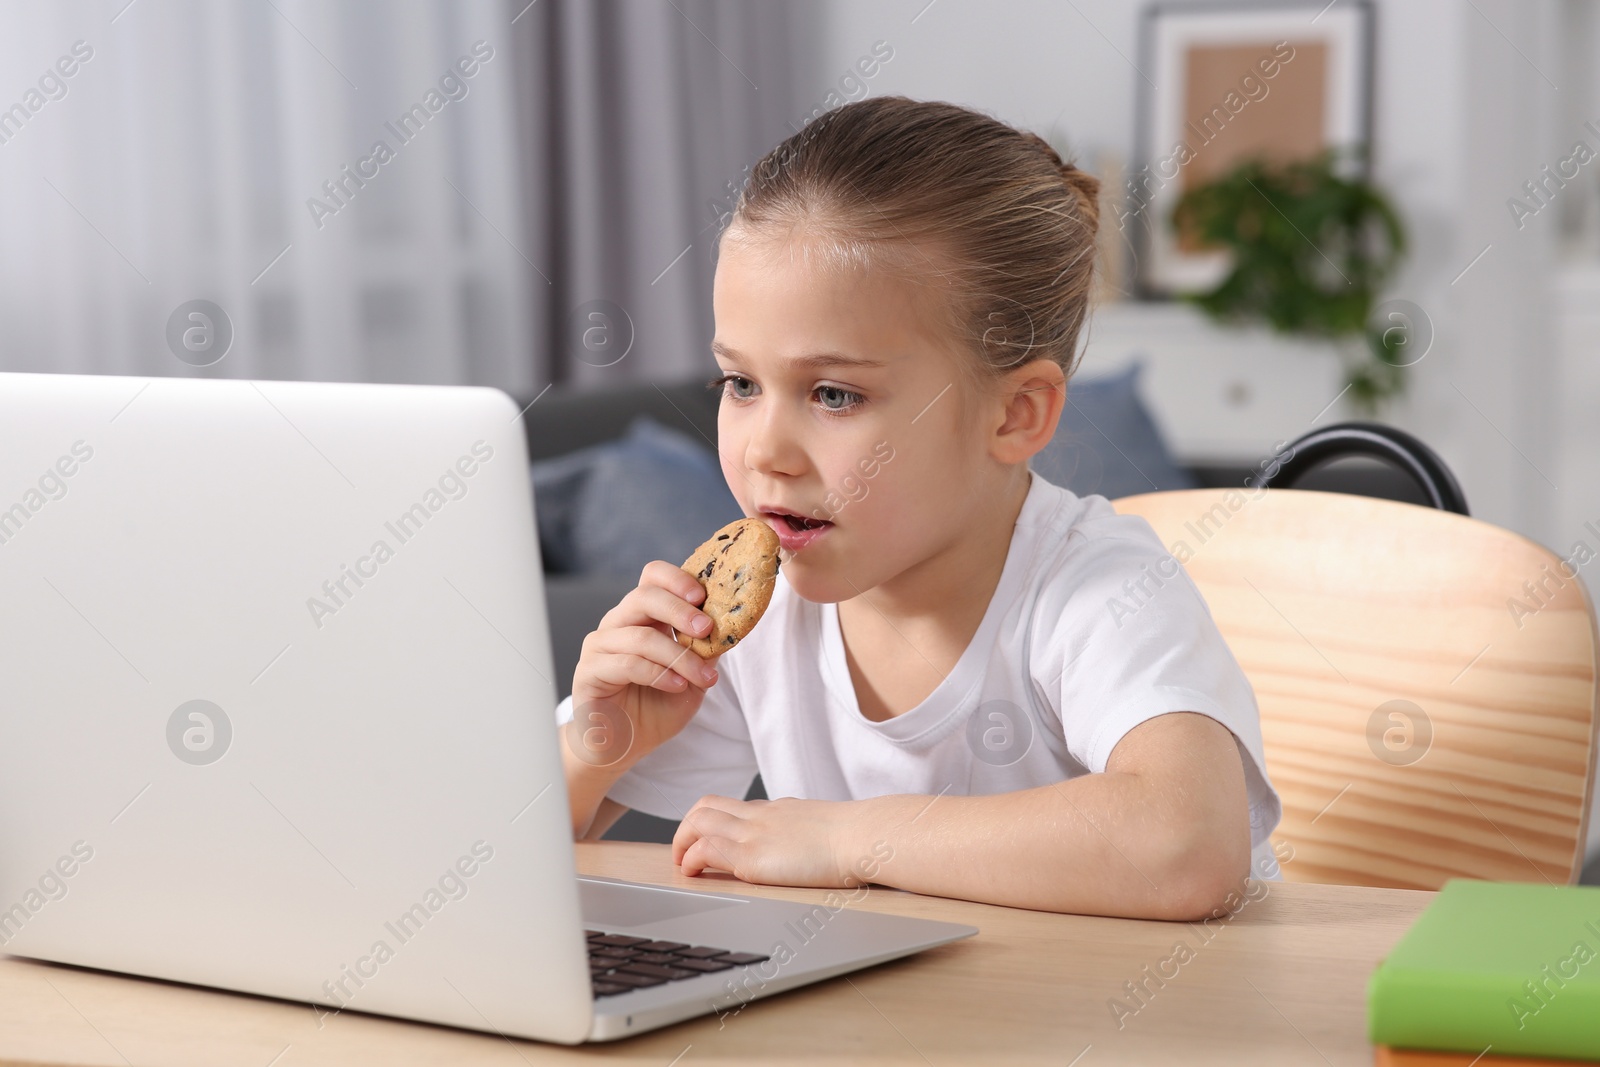 Photo of Little girl using laptop and eating biscuit at table indoors. Internet addiction